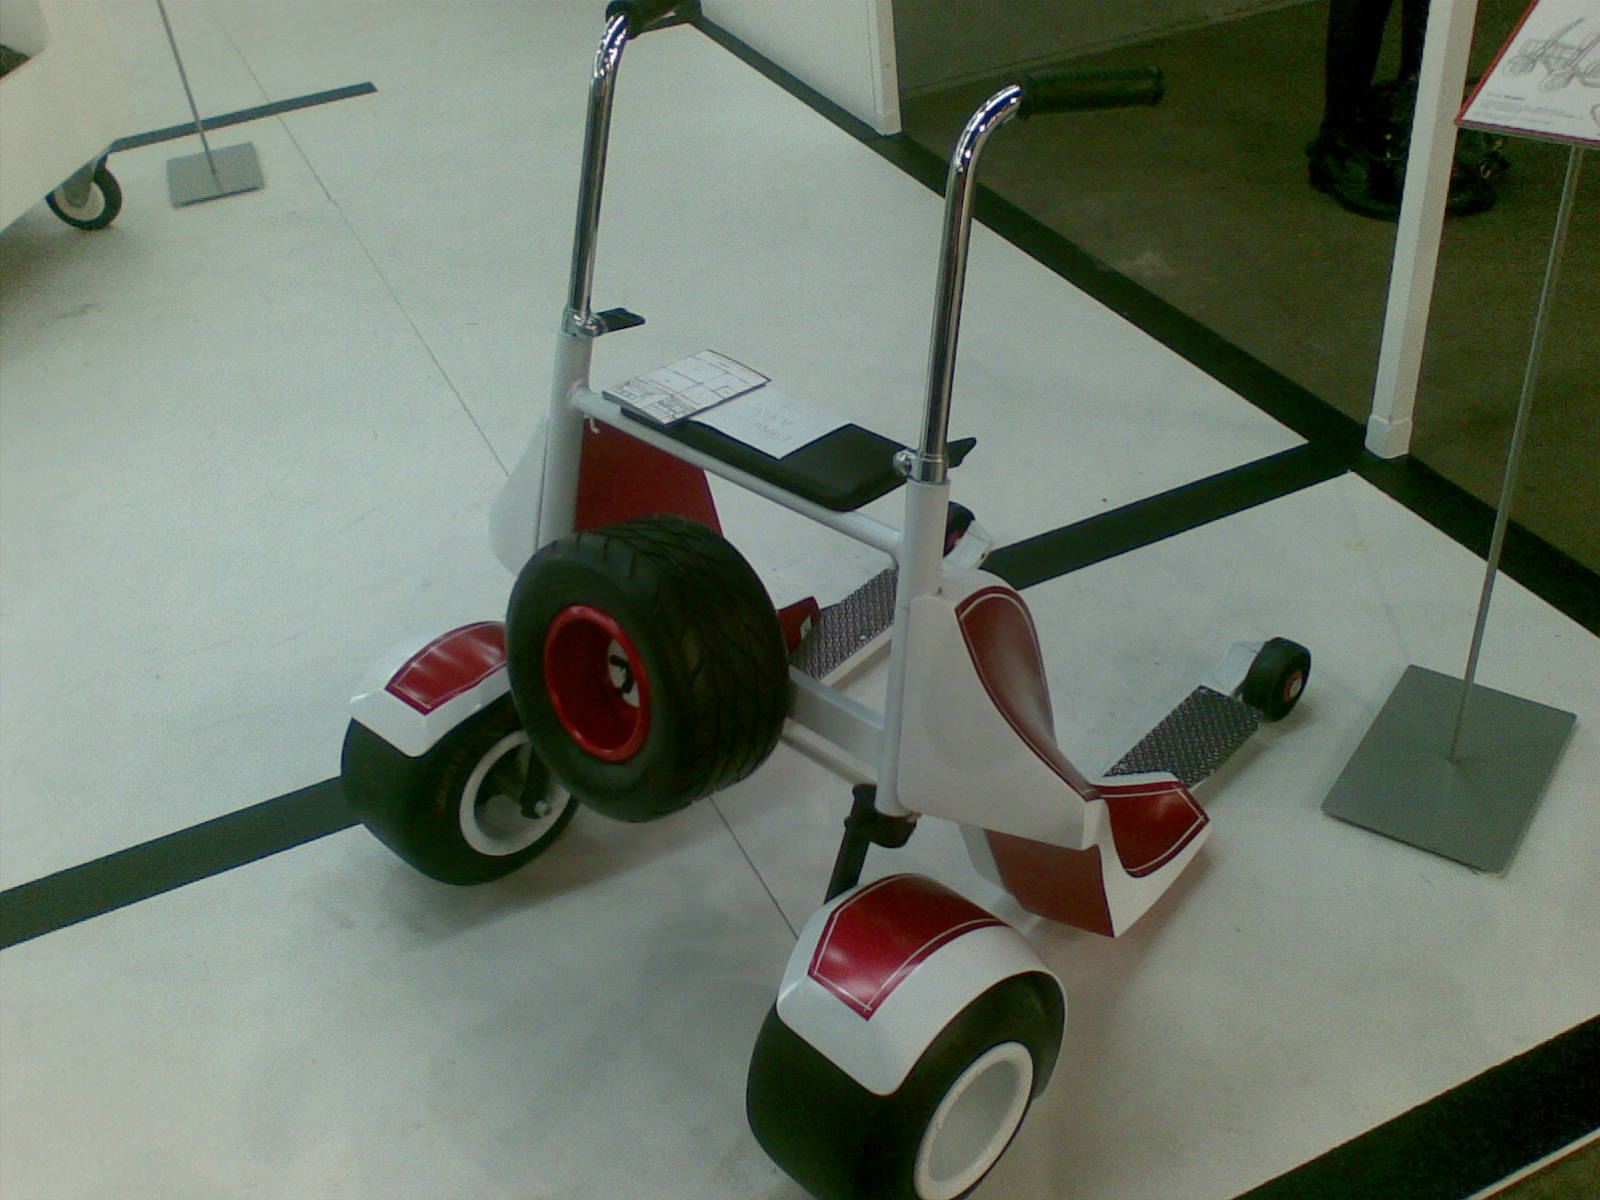 a motorized scooter in motion on display on a floor